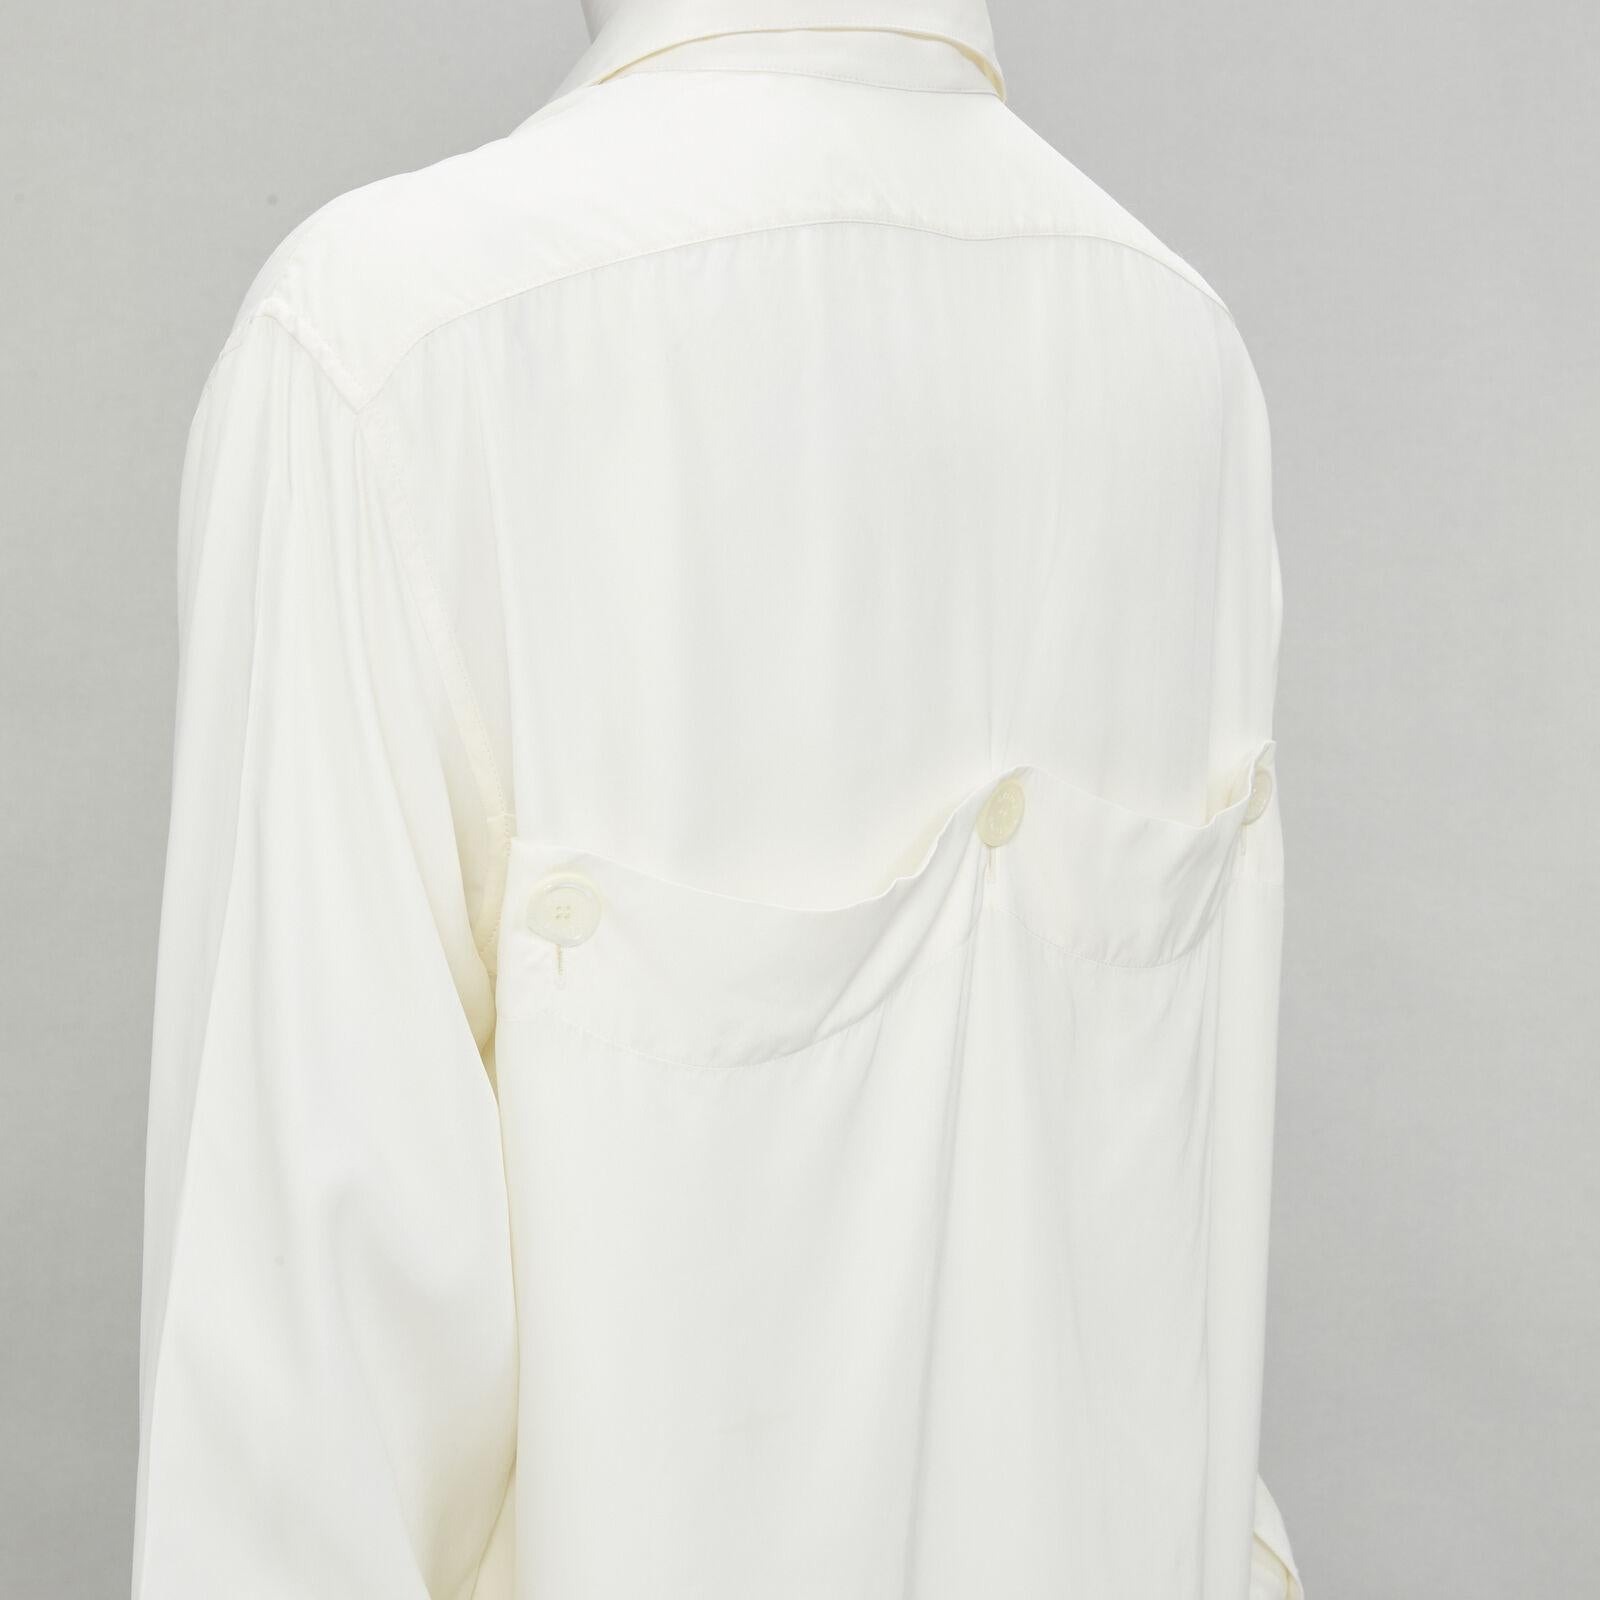 OLD CELINE Phoebe Philo cream viscose button detail back high low shirt FR36 S
Reference: JACG/A00076
Brand: Celine
Designer: Phoebe Philo
Material: Viscose
Color: Cream
Pattern: Solid
Closure: Button
Extra Details: Wide double button cuff. Button